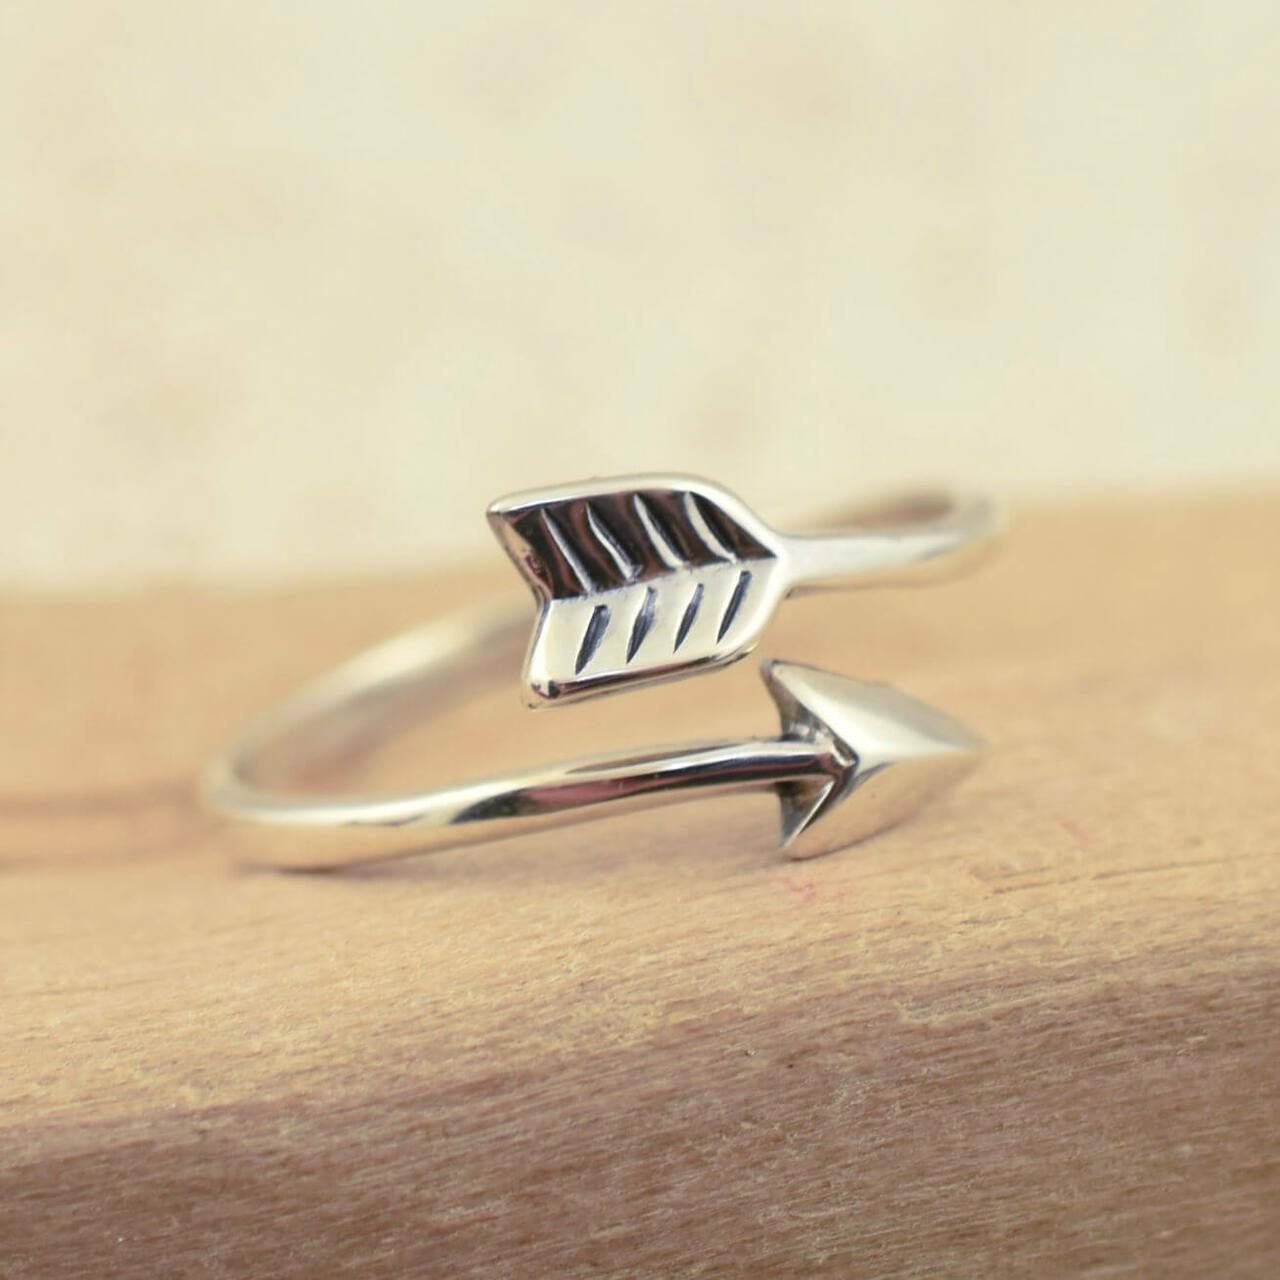 Handcrafted .925 sterling silver arrow wrap ring